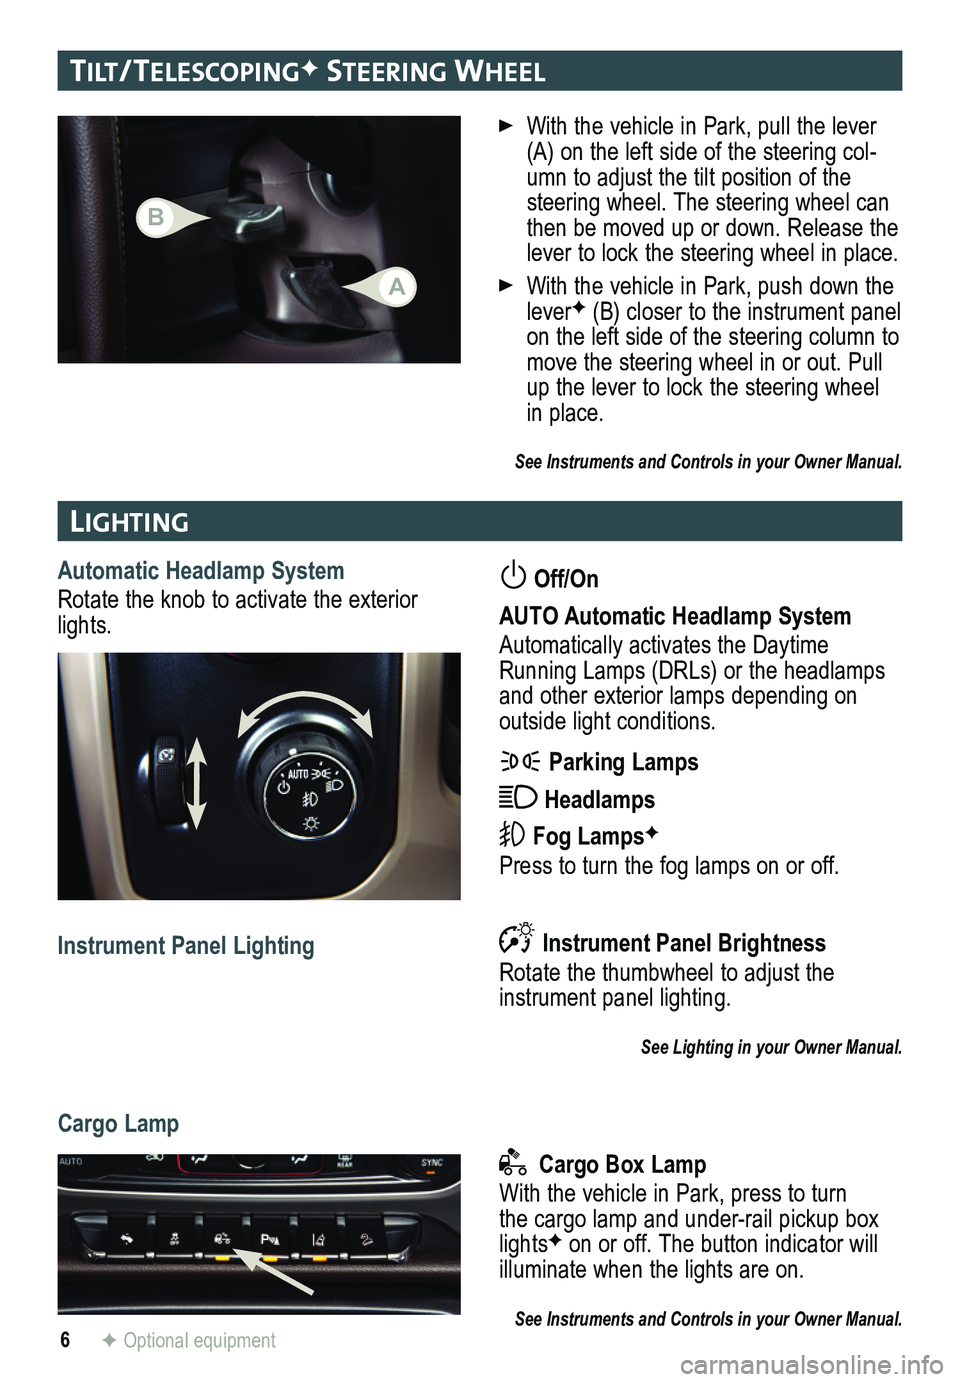 GMC SIERRA HD 2015  Get To Know Guide 6
lIgHtIng
Automatic Headlamp System
Rotate the knob to activate the exterior lights.
 Off/On 
AUTO Automatic Headlamp System
Automatically activates the Daytime Running Lamps (DRLs) or the headlamps 